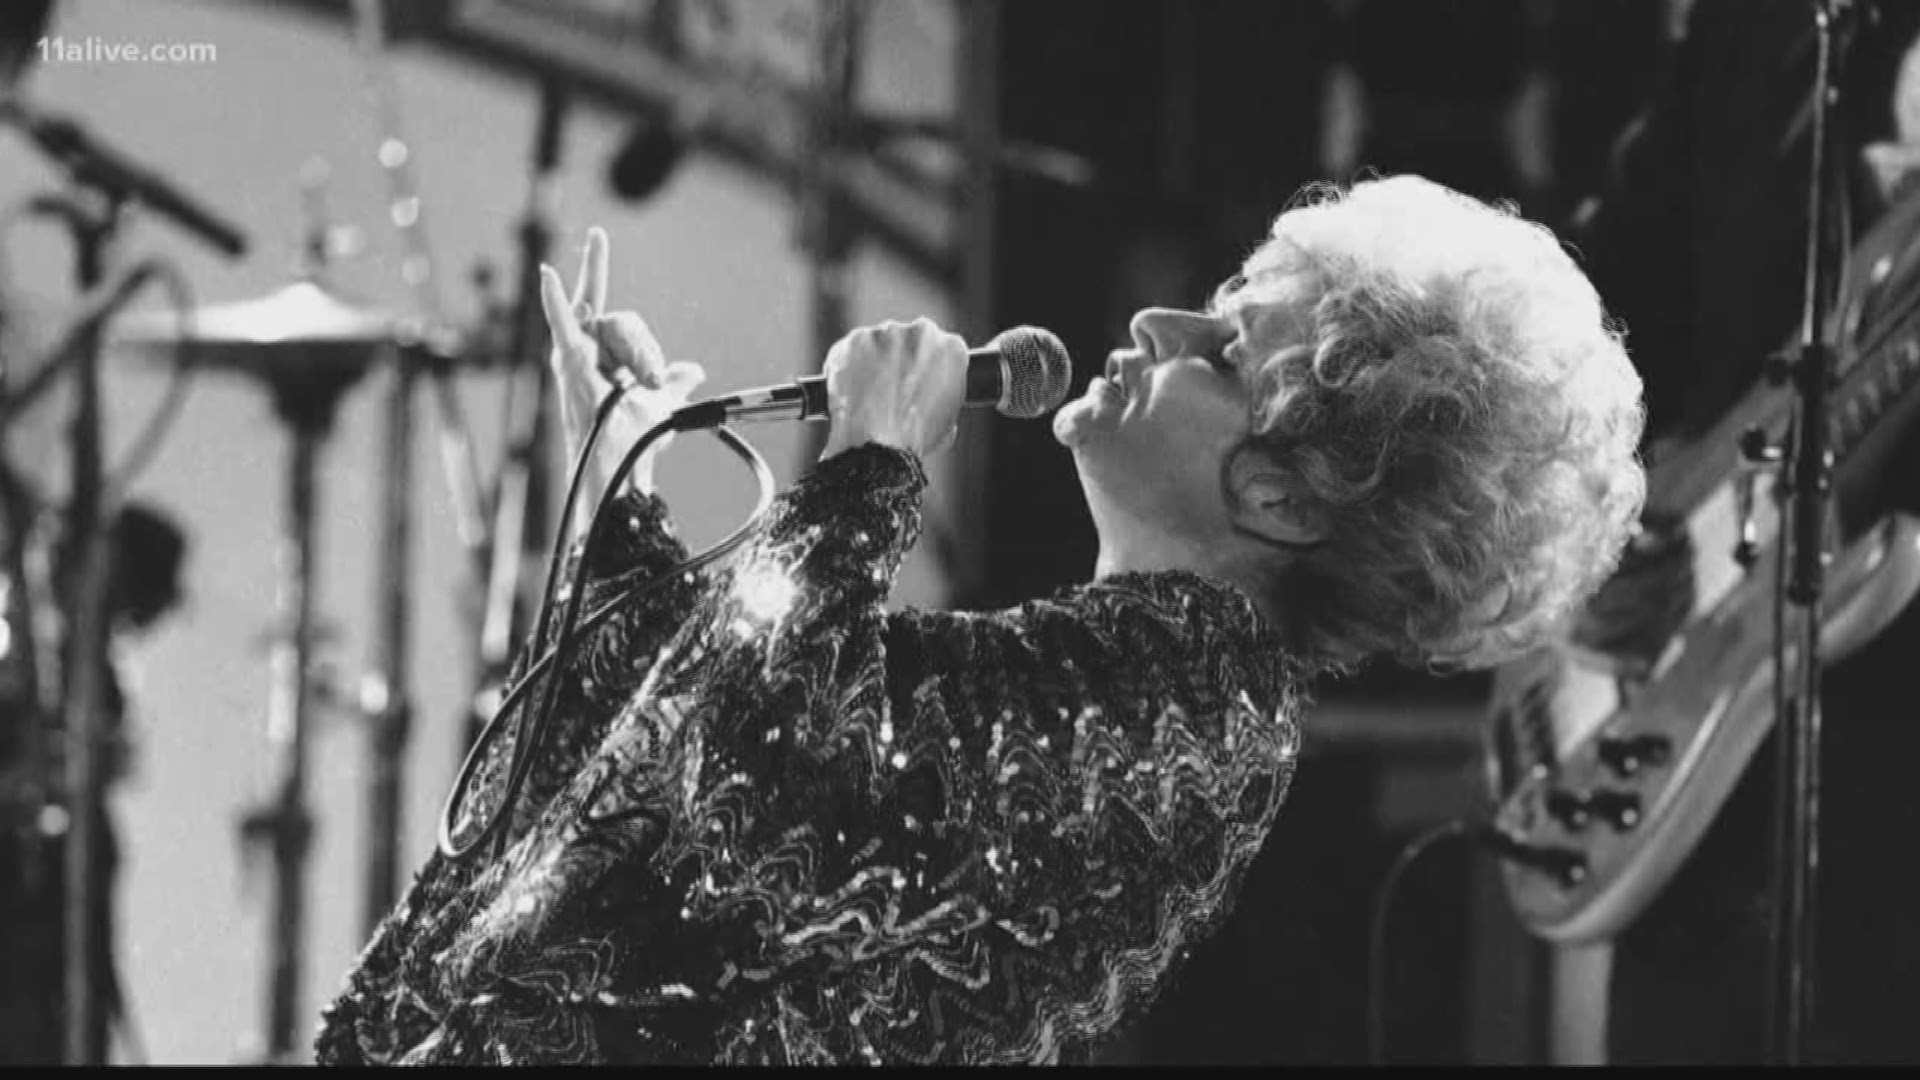 Jeff Hullinger shares the story behind chart-topping vocalist Brenda Lee.